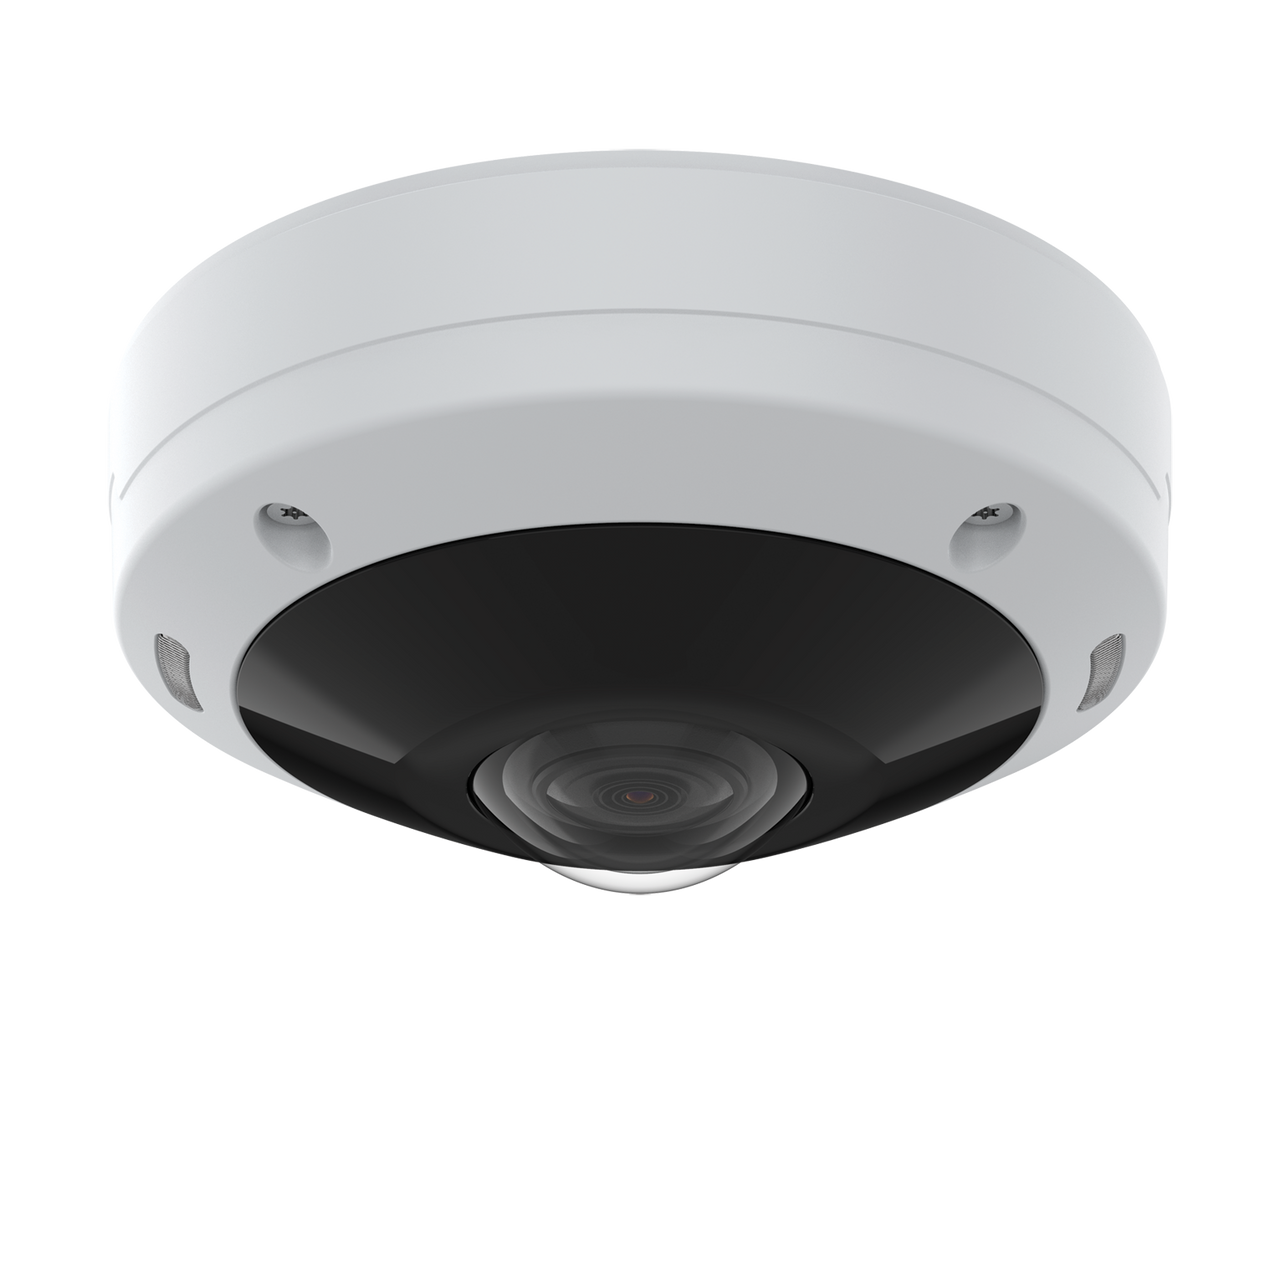 AXIS M4308-PLE 12 MP outdoor-ready dome with audio capture